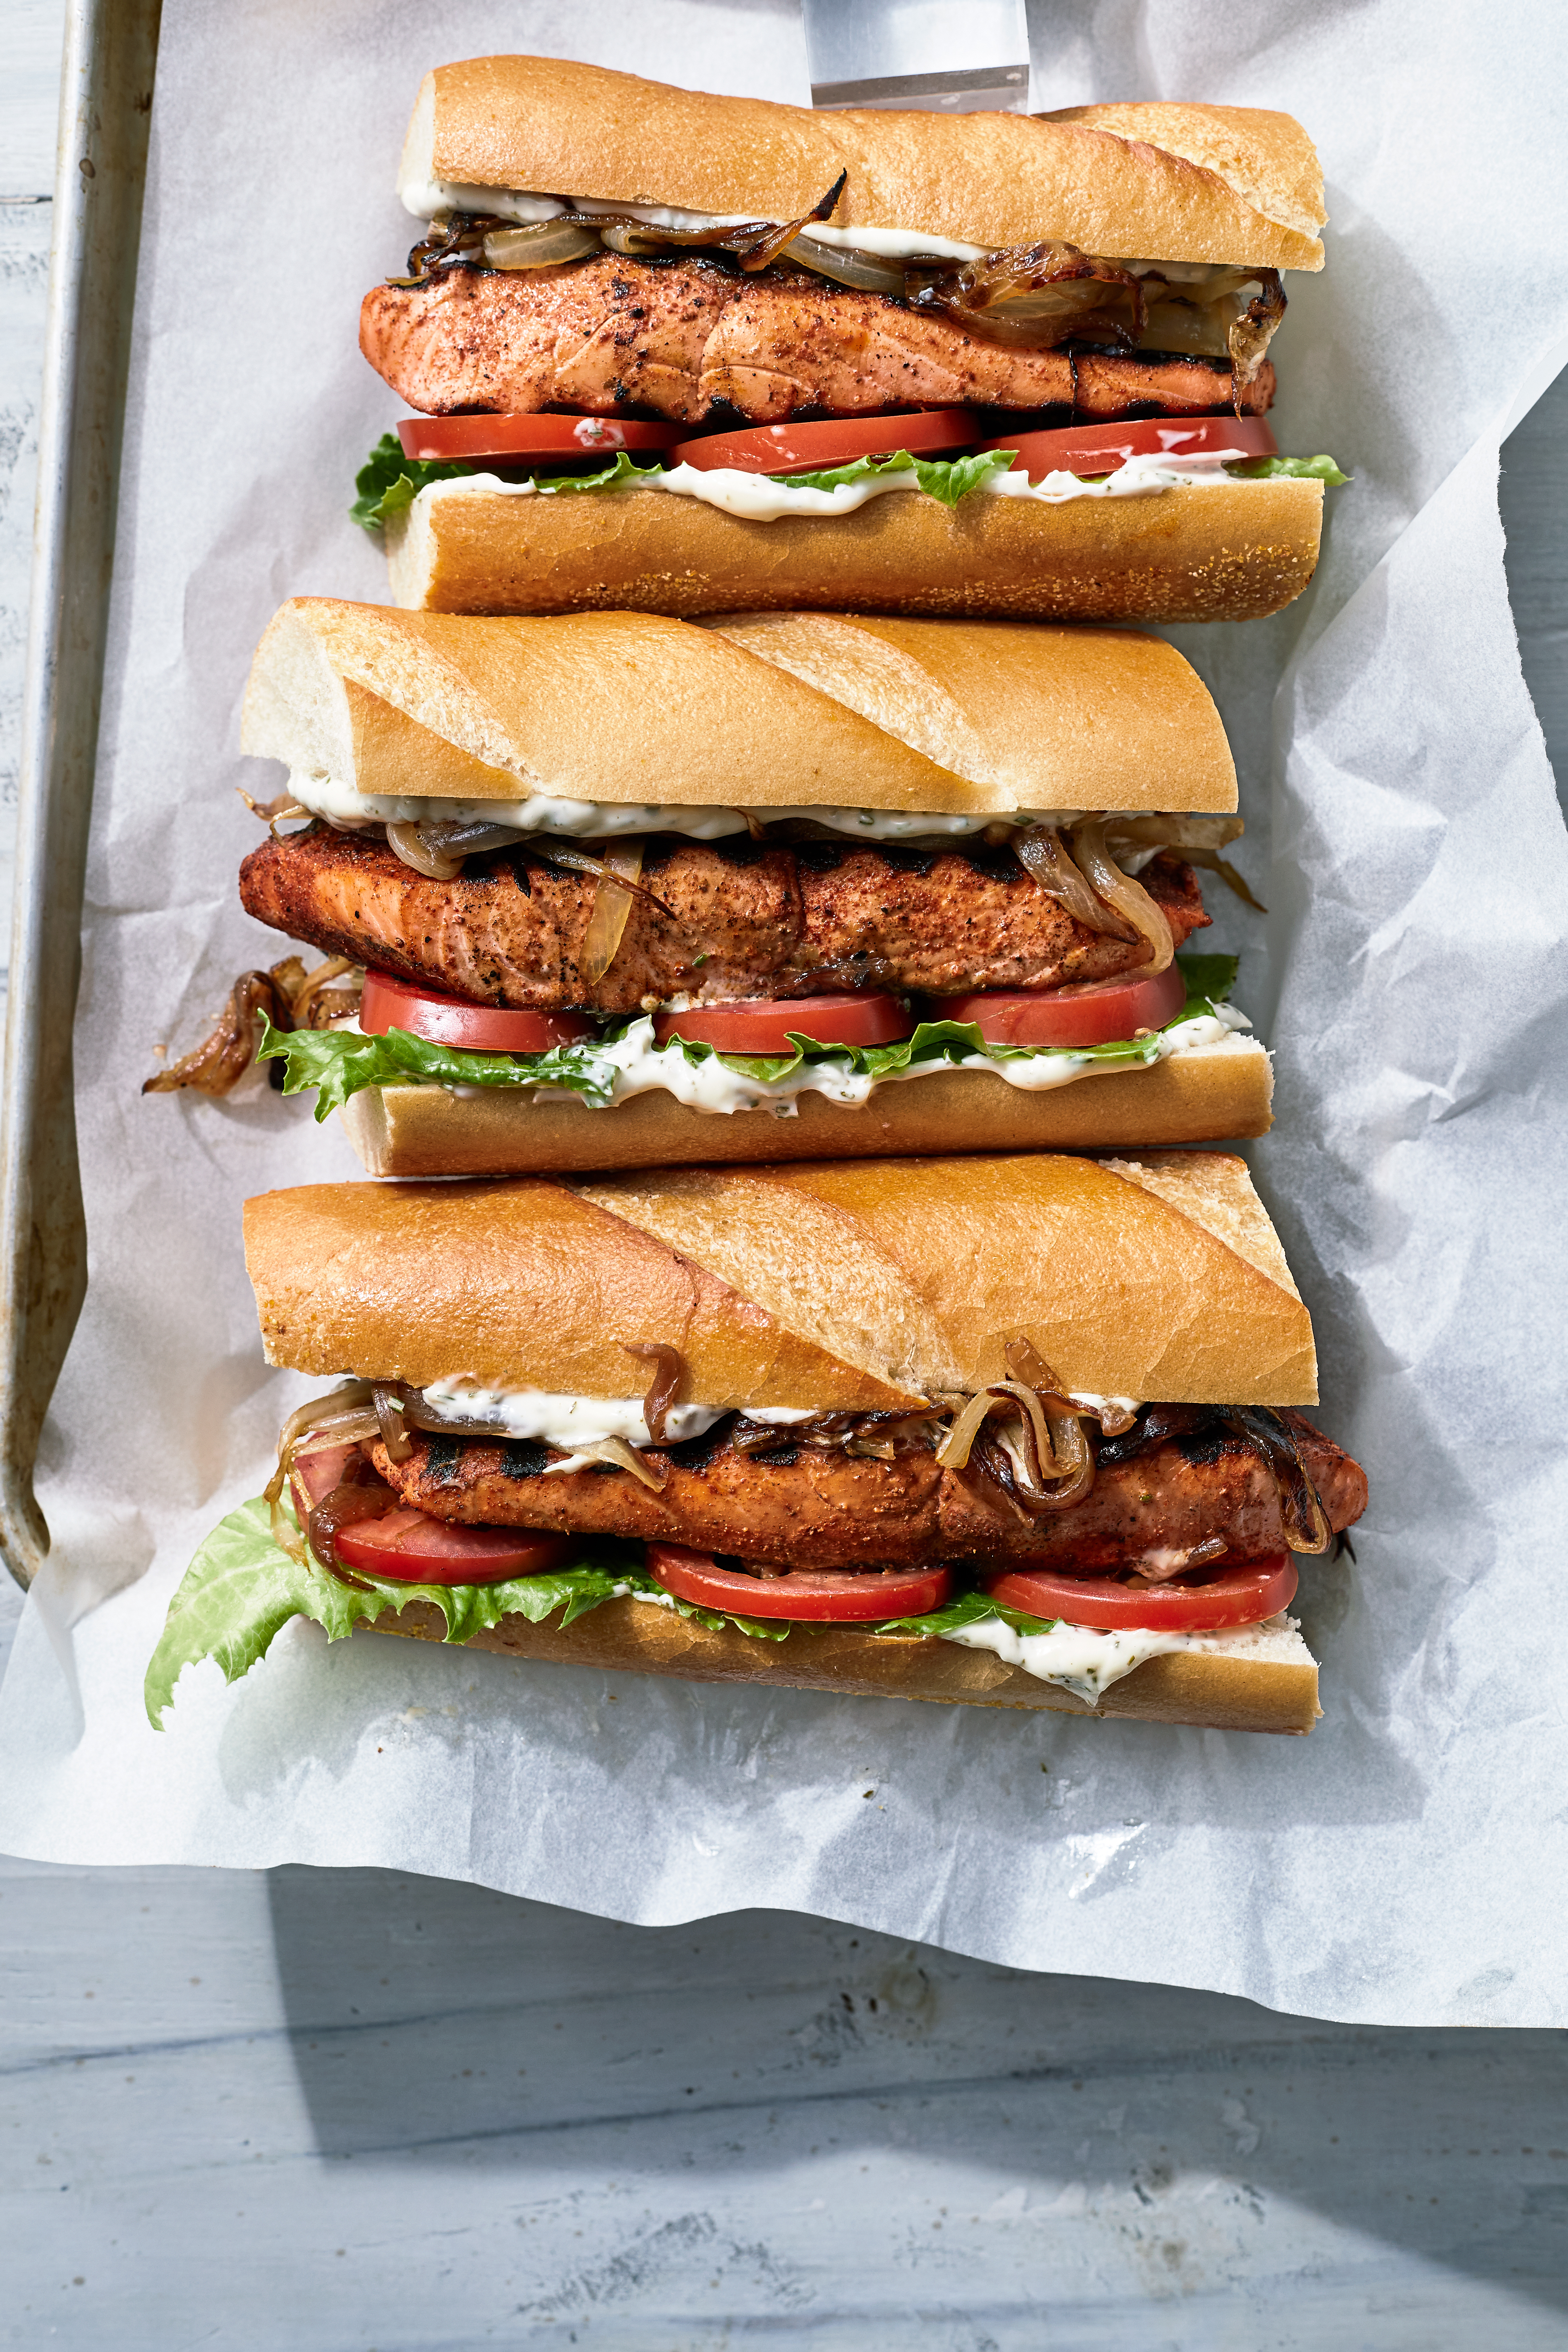 Market Grill Fish Sandwiches Recipe Sunset Magazine,Single Pole Switch With 3 Wires